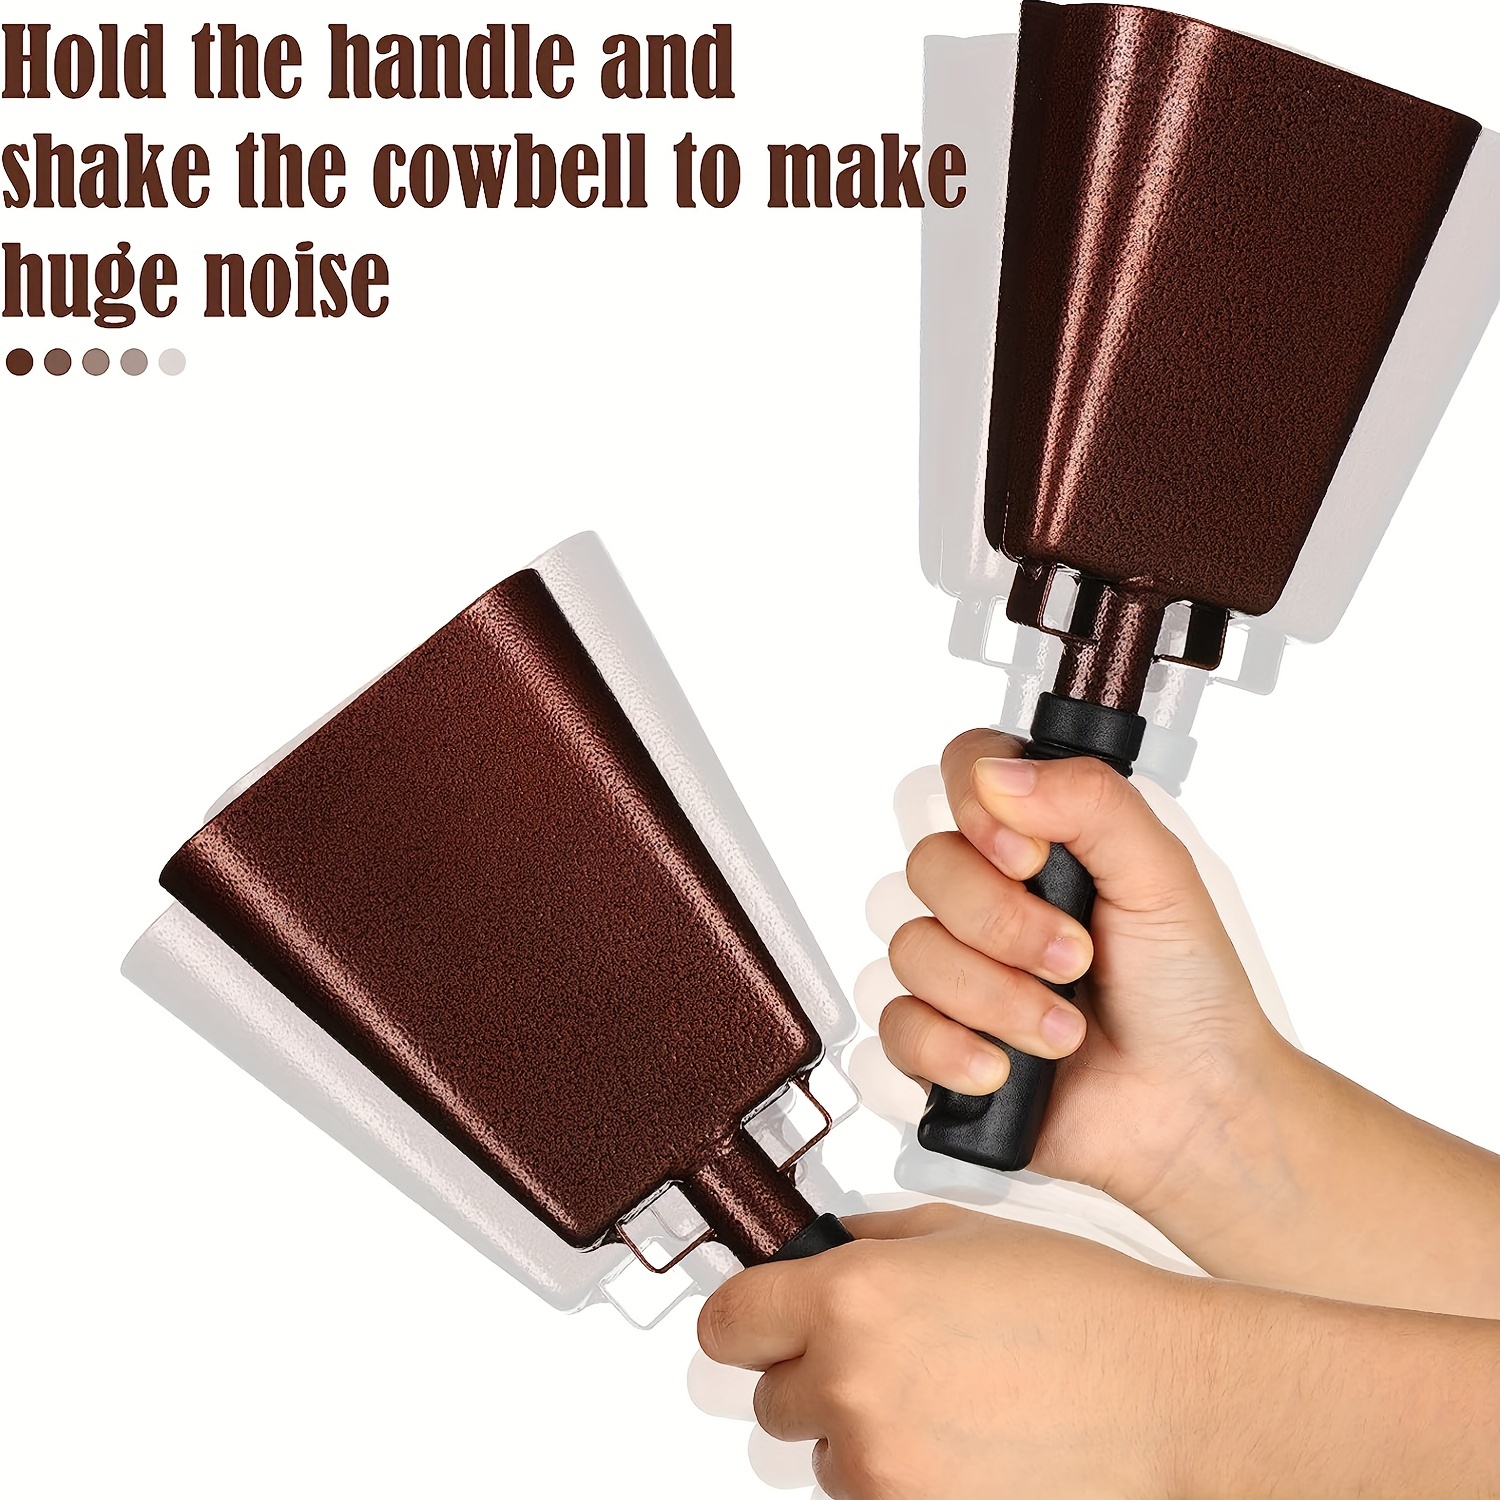  2 Pieces Cow Bell with Handle Noise Makers Cowbells